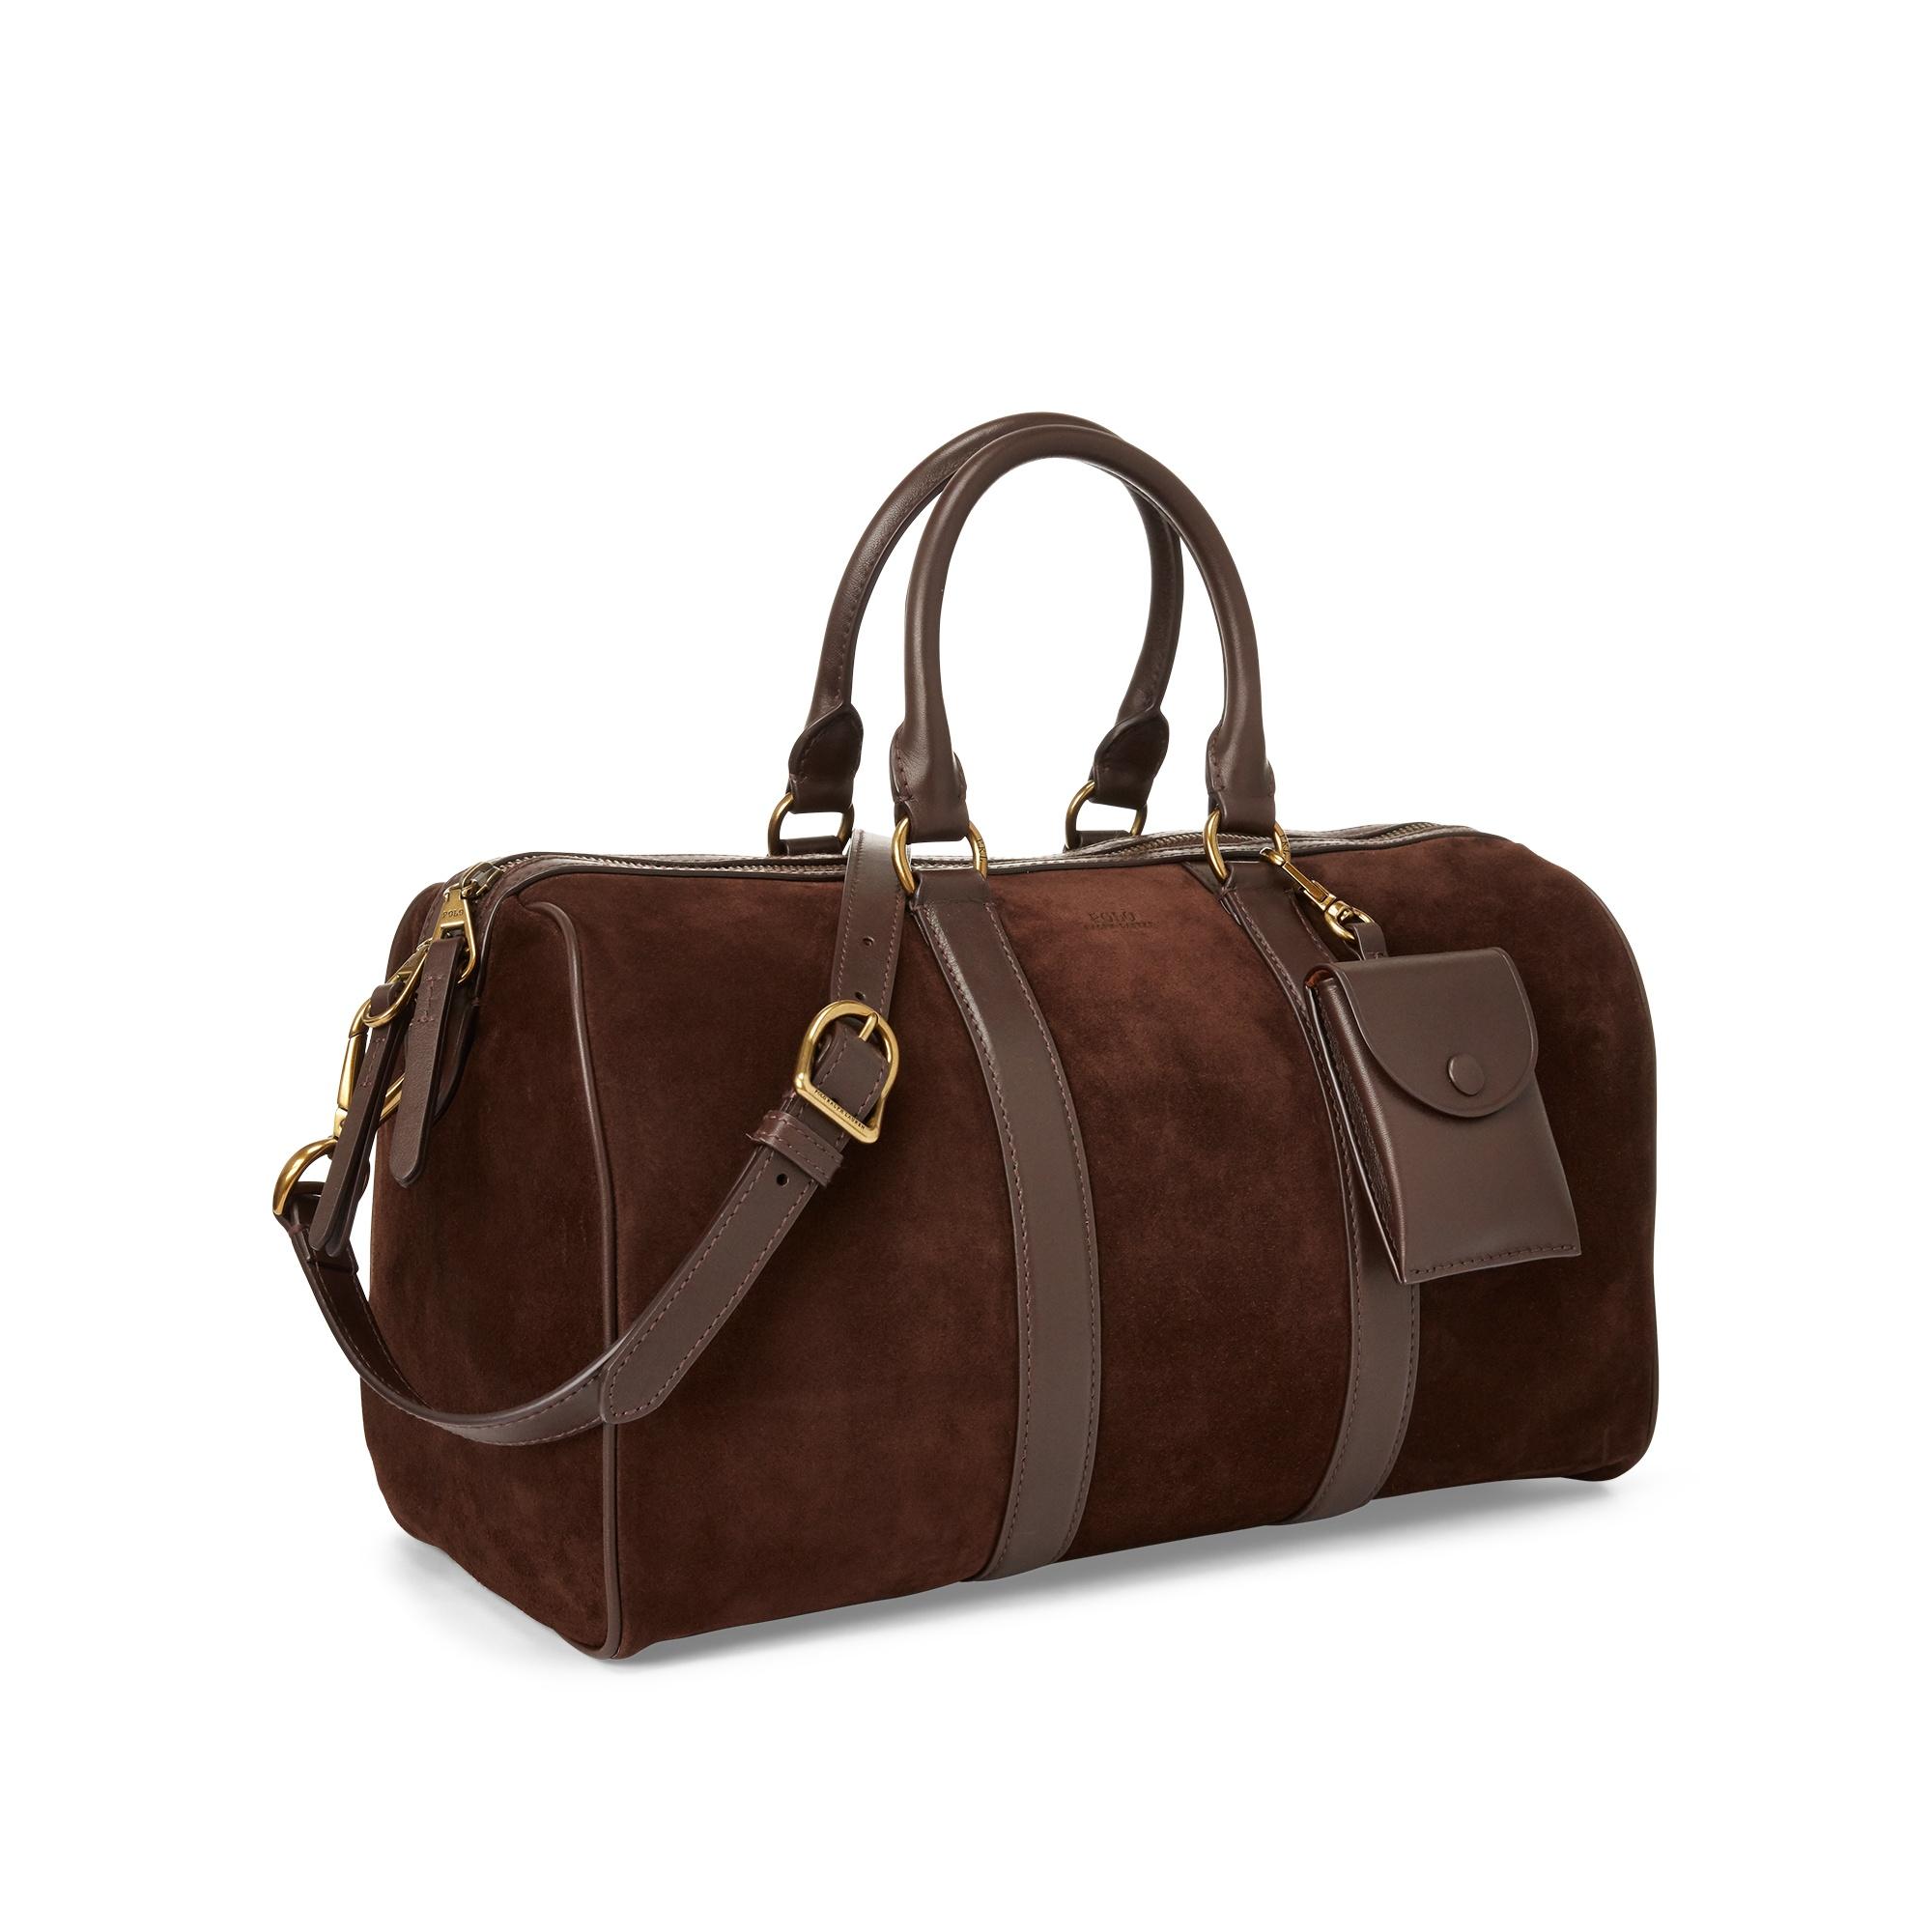 A faithful First Pith Polo Ralph Lauren Suede Camden Duffle Bag in Chocolate (Brown) - Lyst